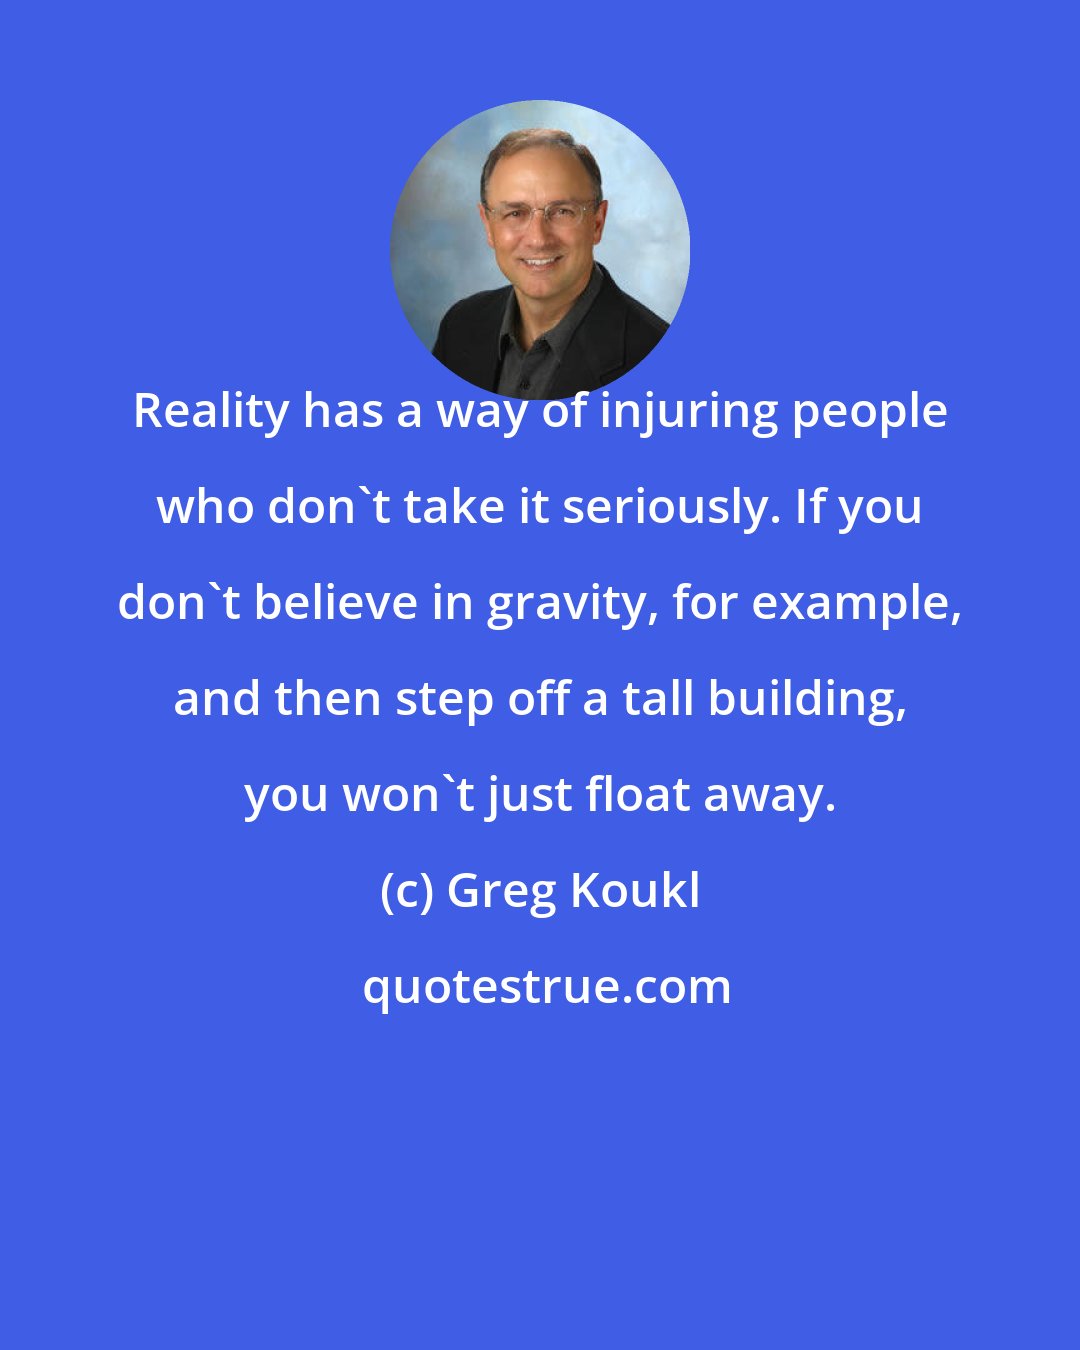 Greg Koukl: Reality has a way of injuring people who don't take it seriously. If you don't believe in gravity, for example, and then step off a tall building, you won't just float away.